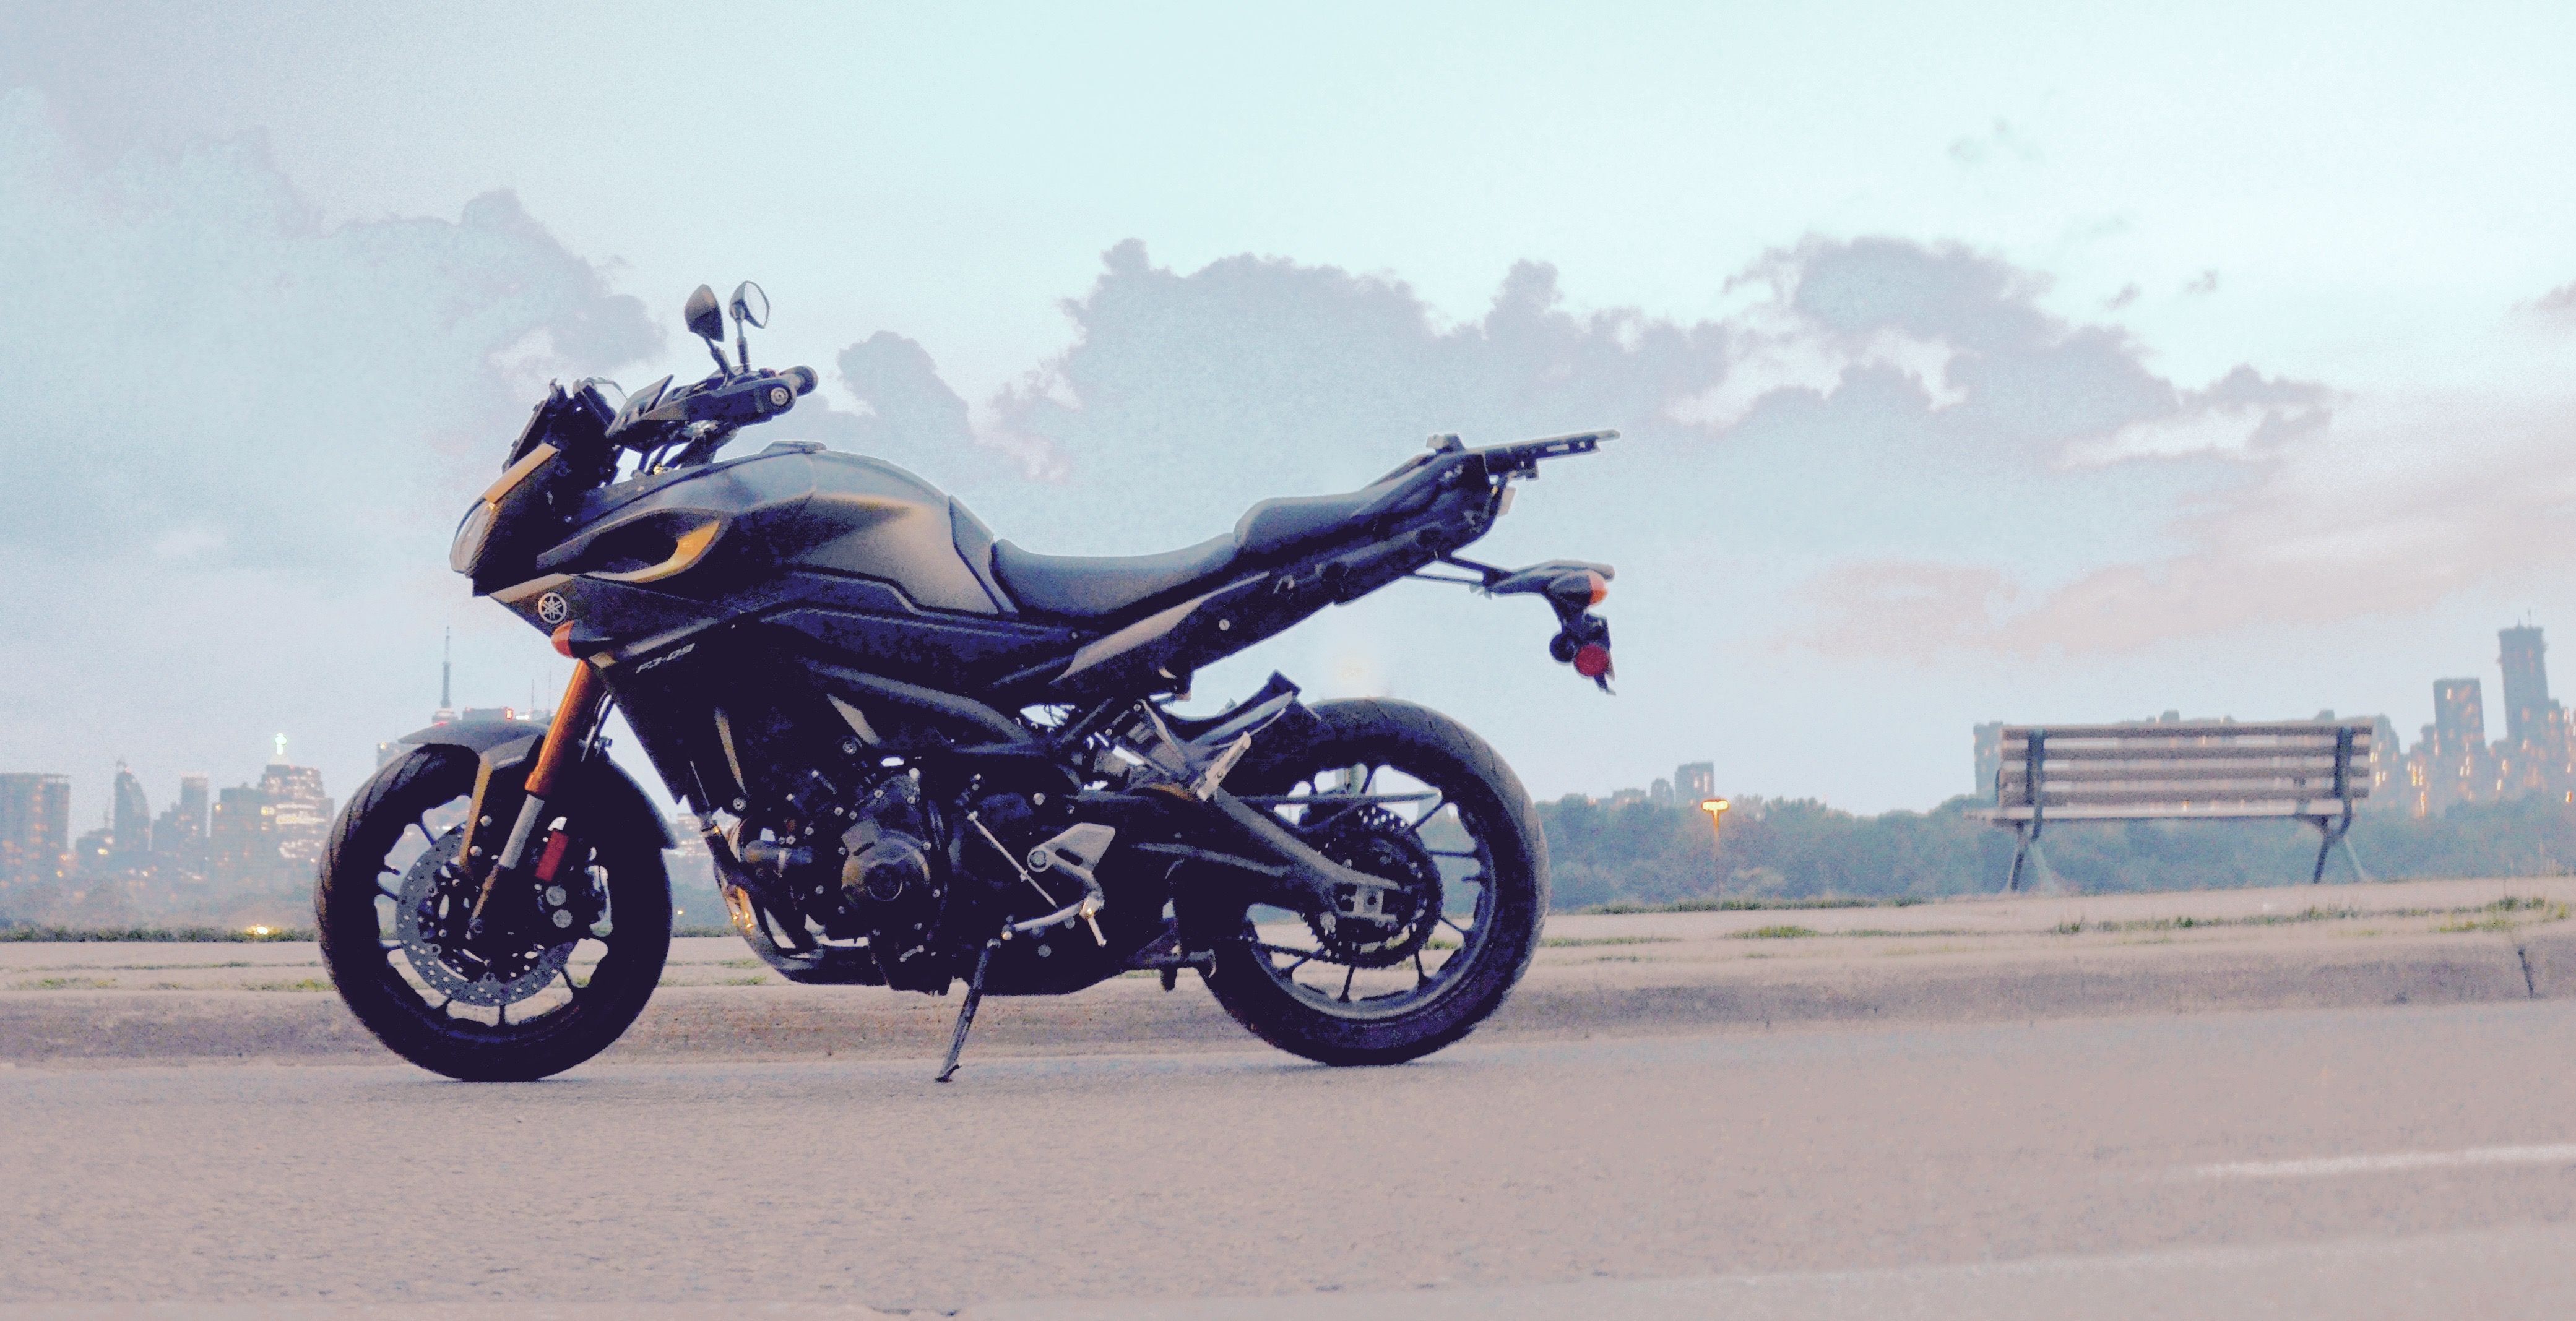 2015 Yamaha FJ-09: One of the most all-round fun bikes of 2015.